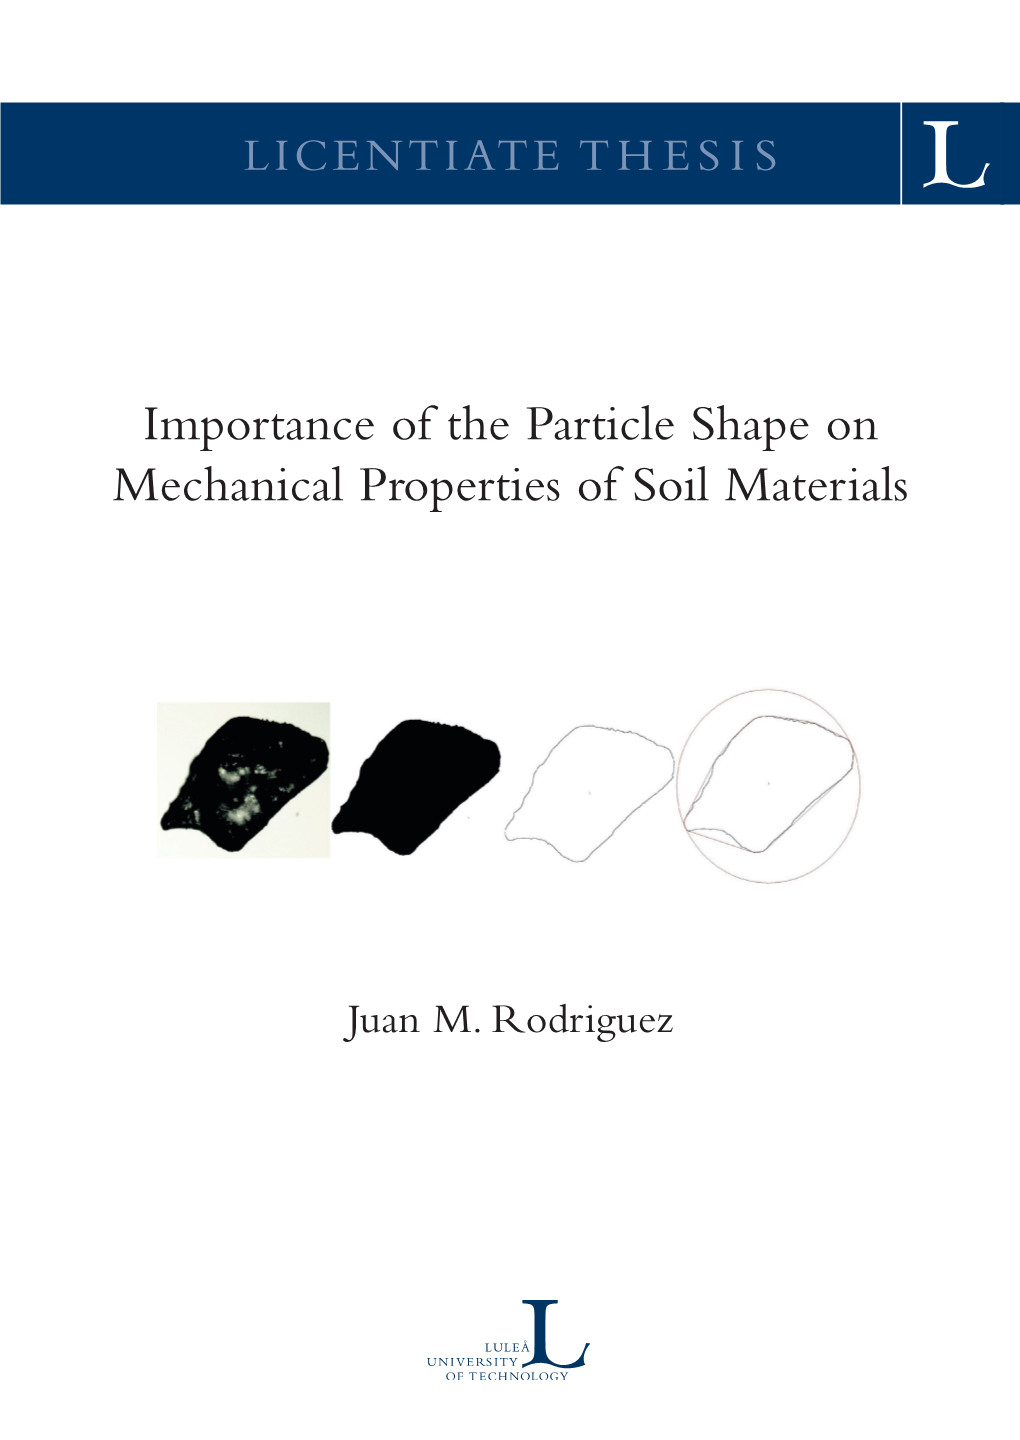 Importance of the Particle Shape on Mechanical Properties of Soil